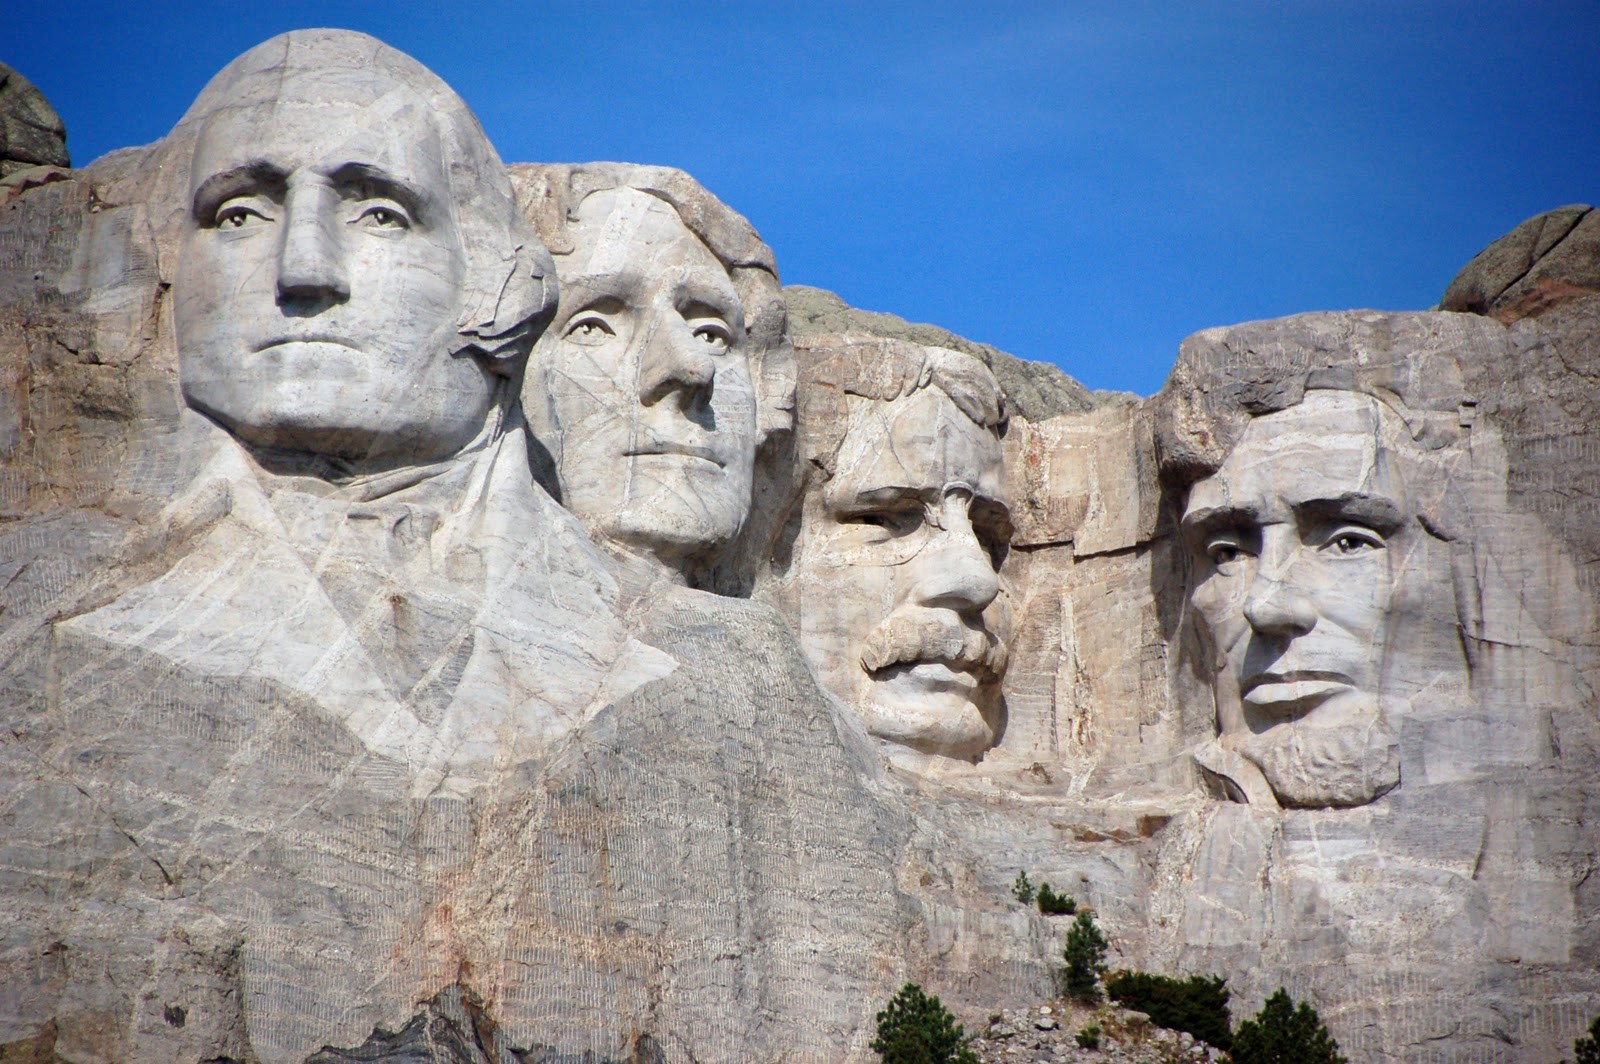 🗺 Most People Can’t Match 20/24 of These Famous Places to Their Country on a Map – Can You? Mount Rushmore, South Dakota